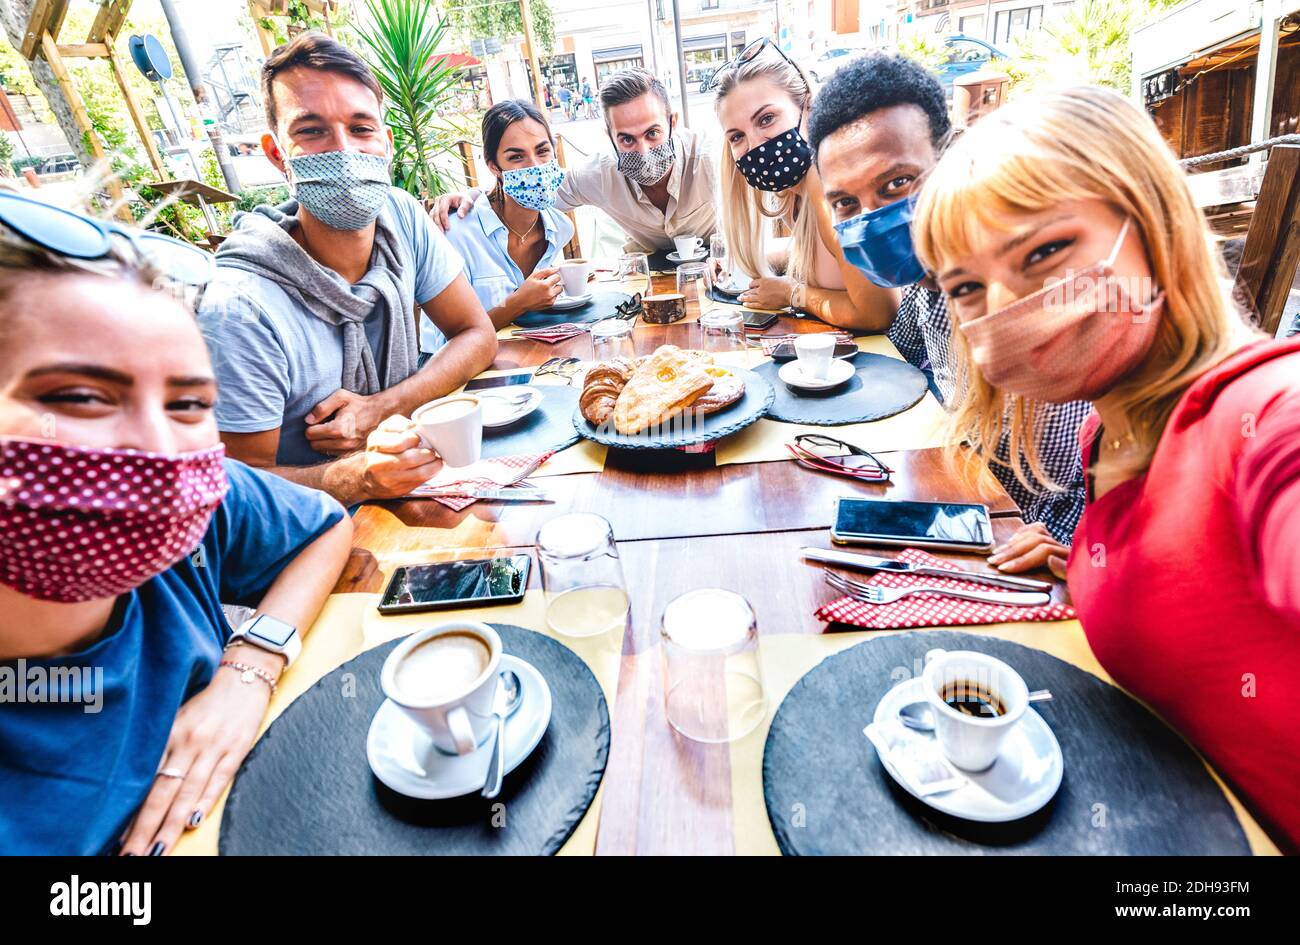 Friends taking selfie at coffee bar - People having fun together at cafeteria covered by face masks - New normal lifestyle concept Stock Photo